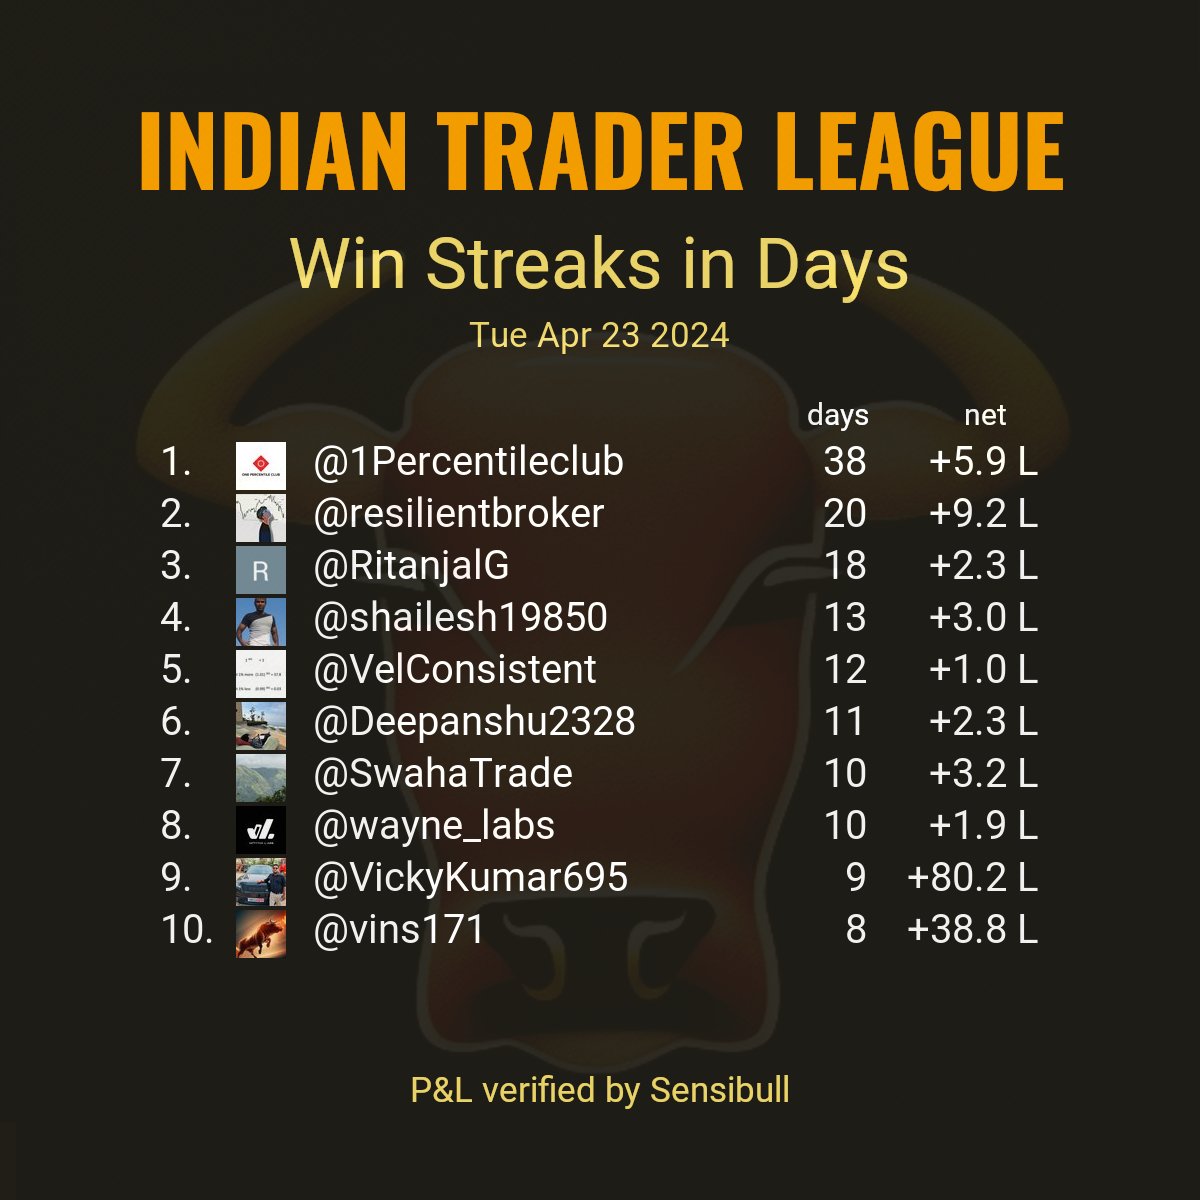 Top 10 longest win streaks reported by stock market participants as of trade date Tue Apr 23 2024. Criteria: Continuous days of #VerifiedBySensibull P&L with profit (>0.0). Sorted by number of days. Only realized P&L is considered.